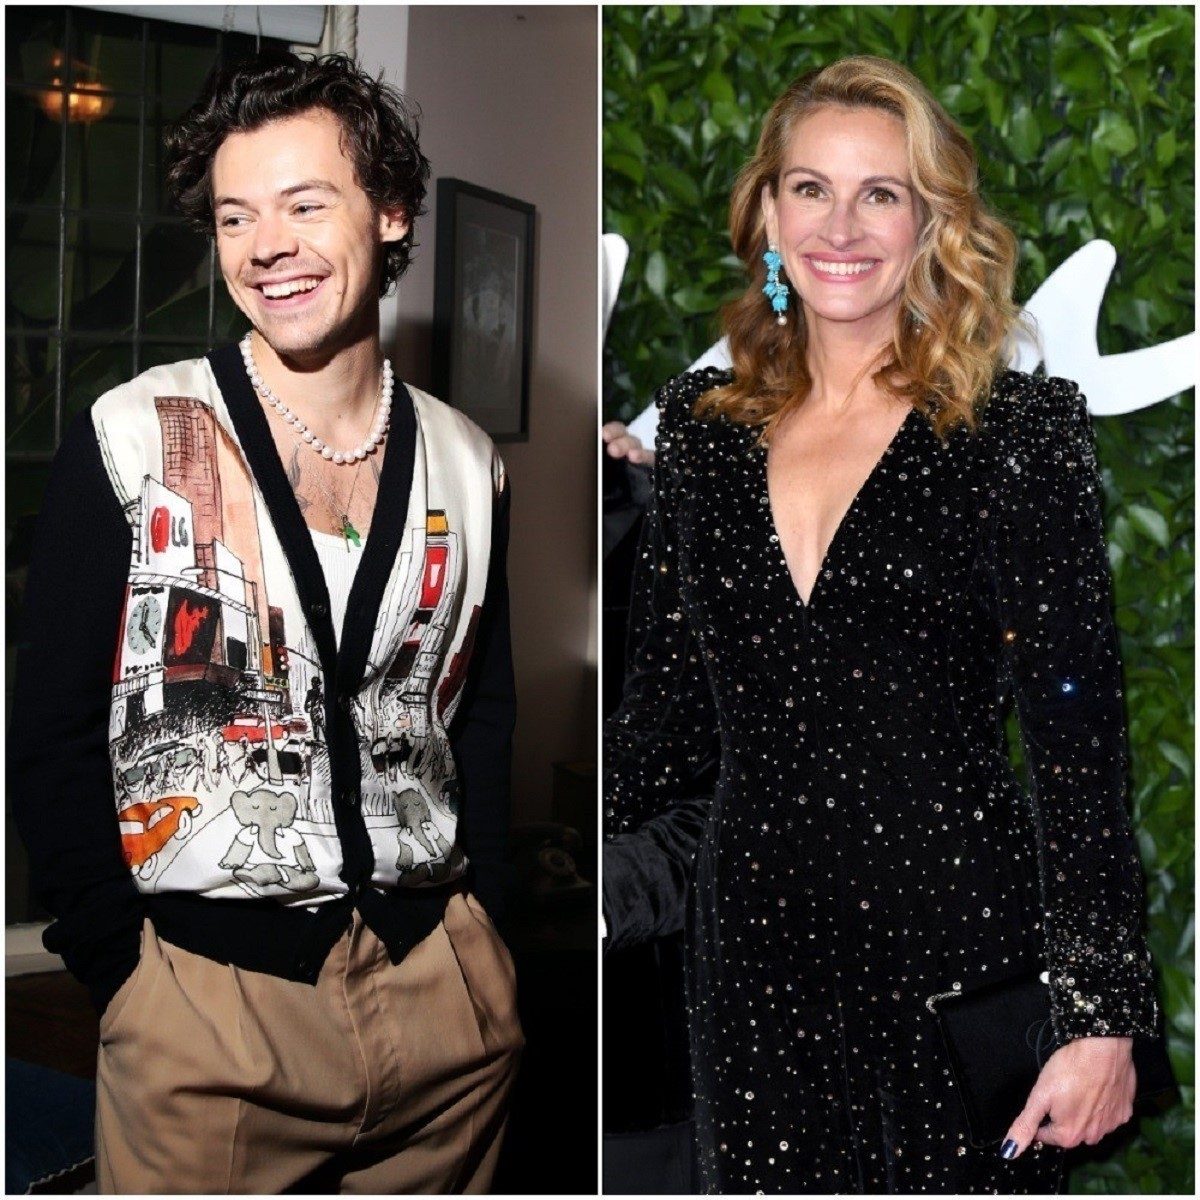 (L): Harry Styles laughing at a Spotify listening session, (R): Julia Roberts smiling in a black sparkling gown at The Fashion Awards